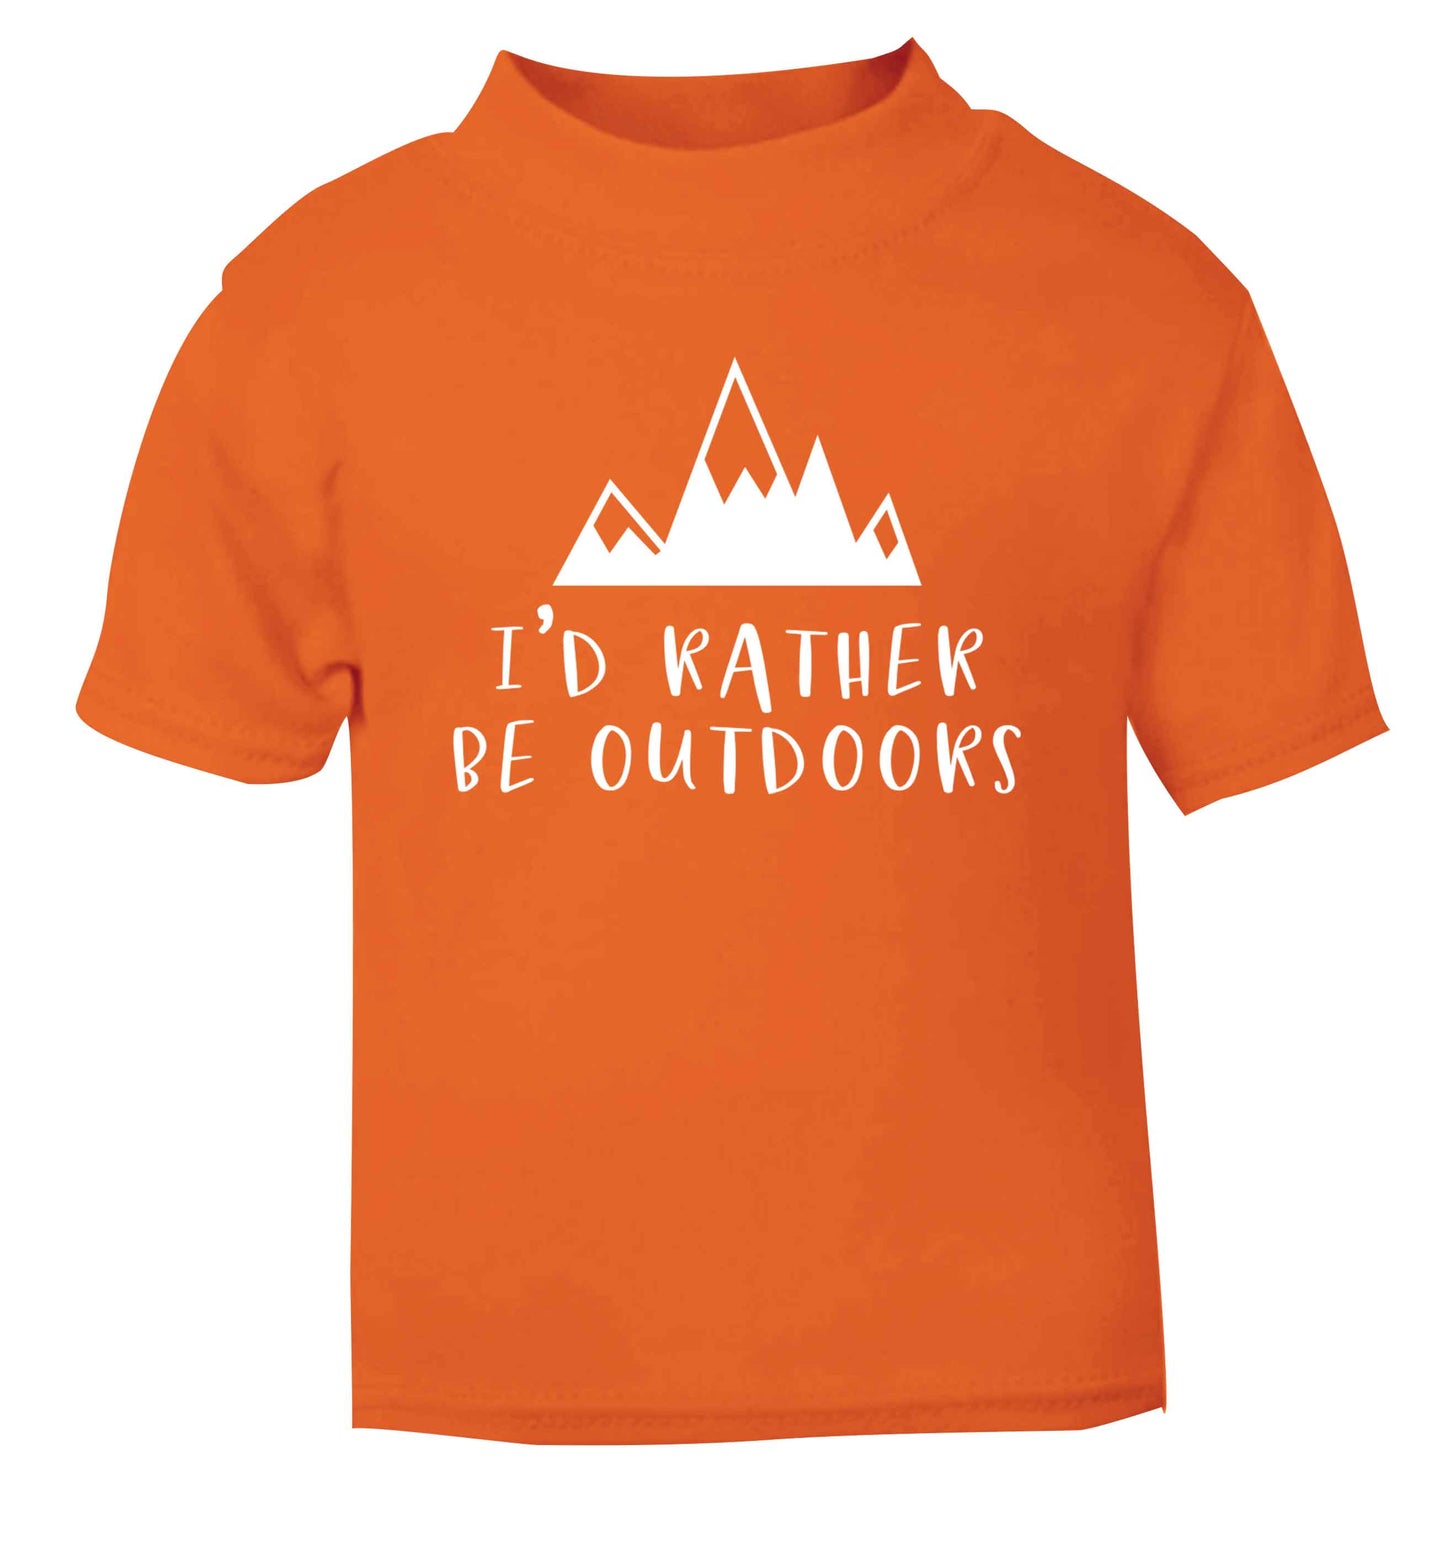 I'd rather be outdoors orange Baby Toddler Tshirt 2 Years